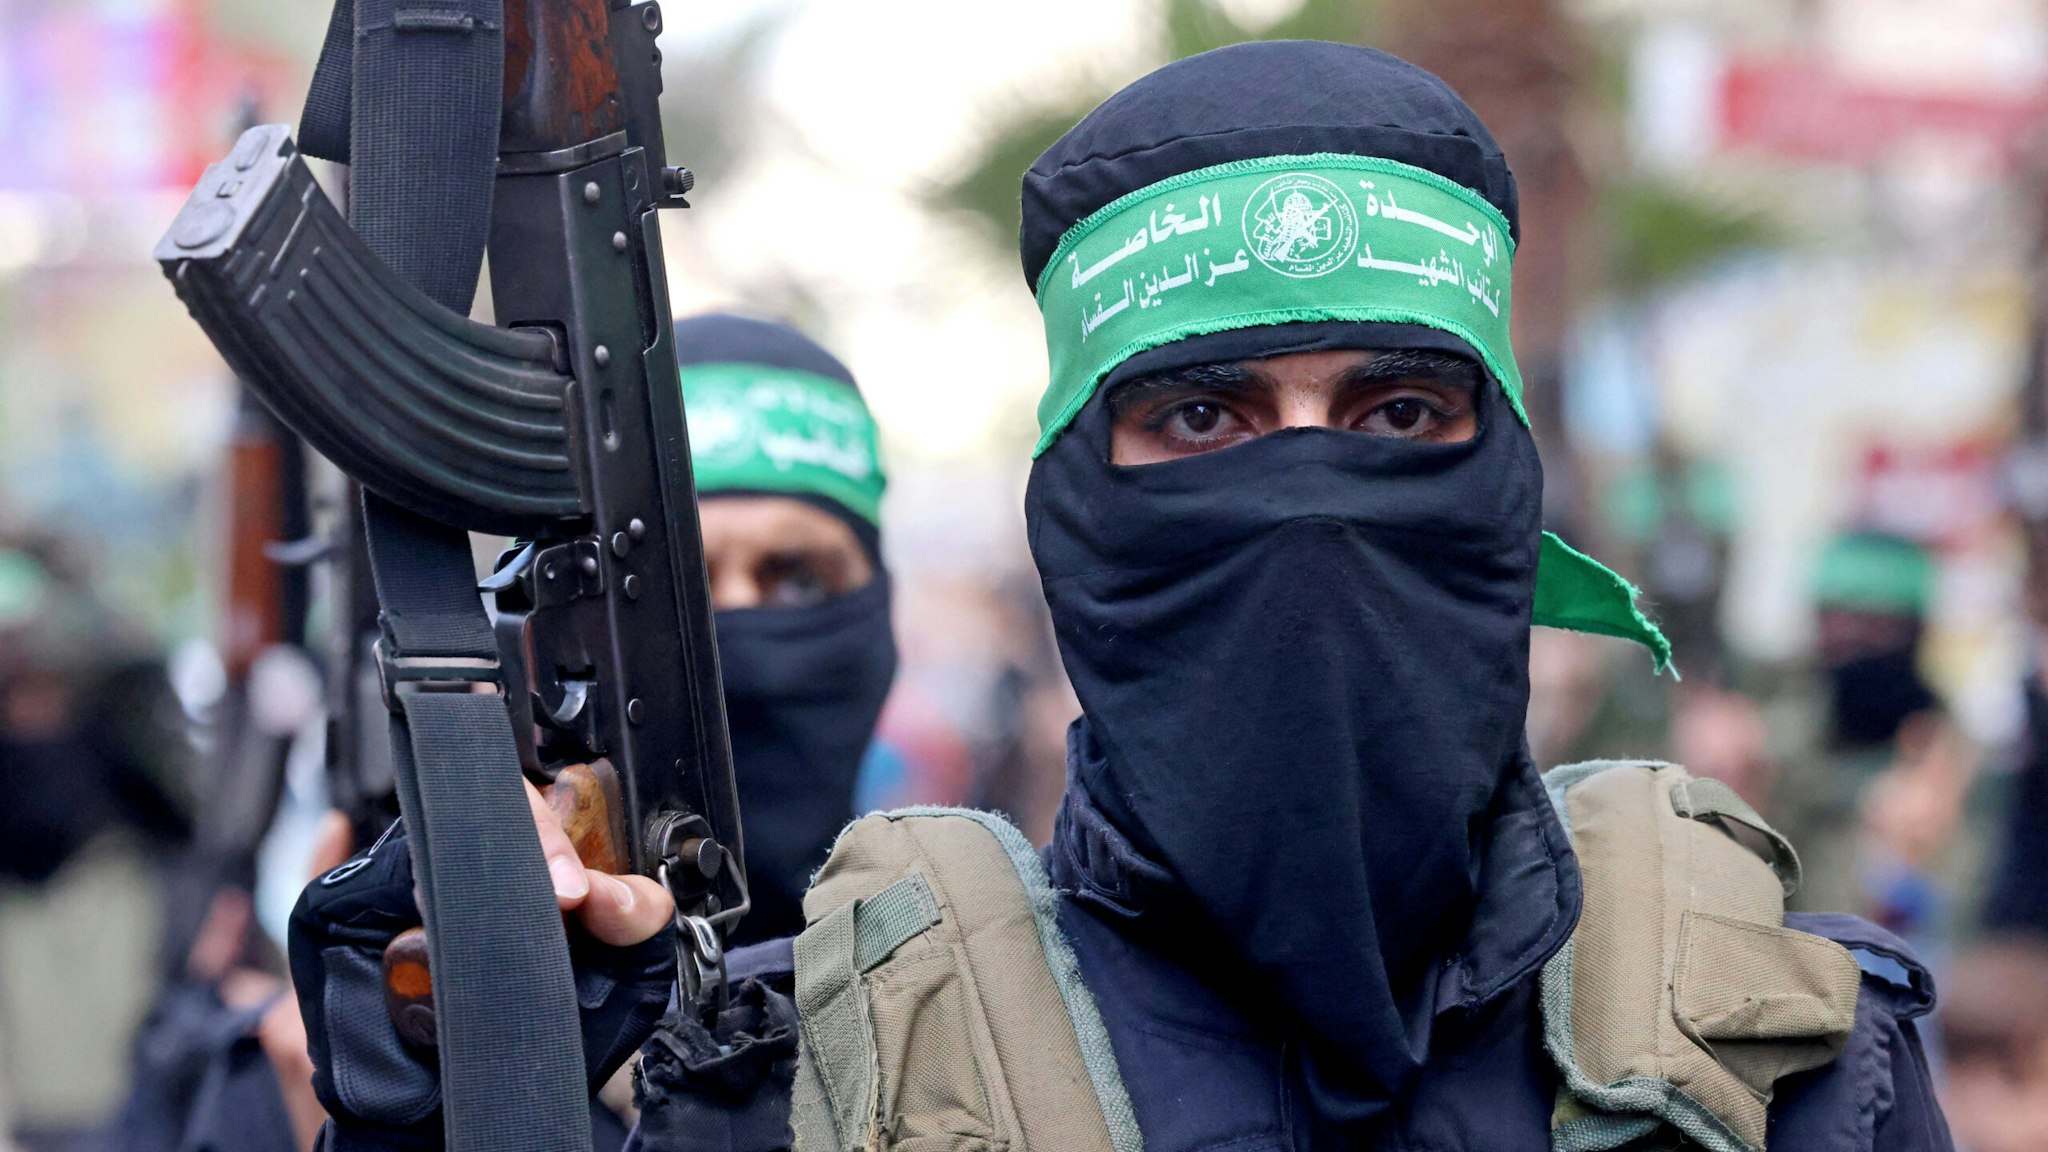 Members of Al-Qassam Brigades, the armed wing of the Palestinian Hamas movement, march in Gaza City on May 22, 2021, in commemoration of senior Hamas commander Bassem Issa who was killed along with other militants in Israeli airstrikes last week.